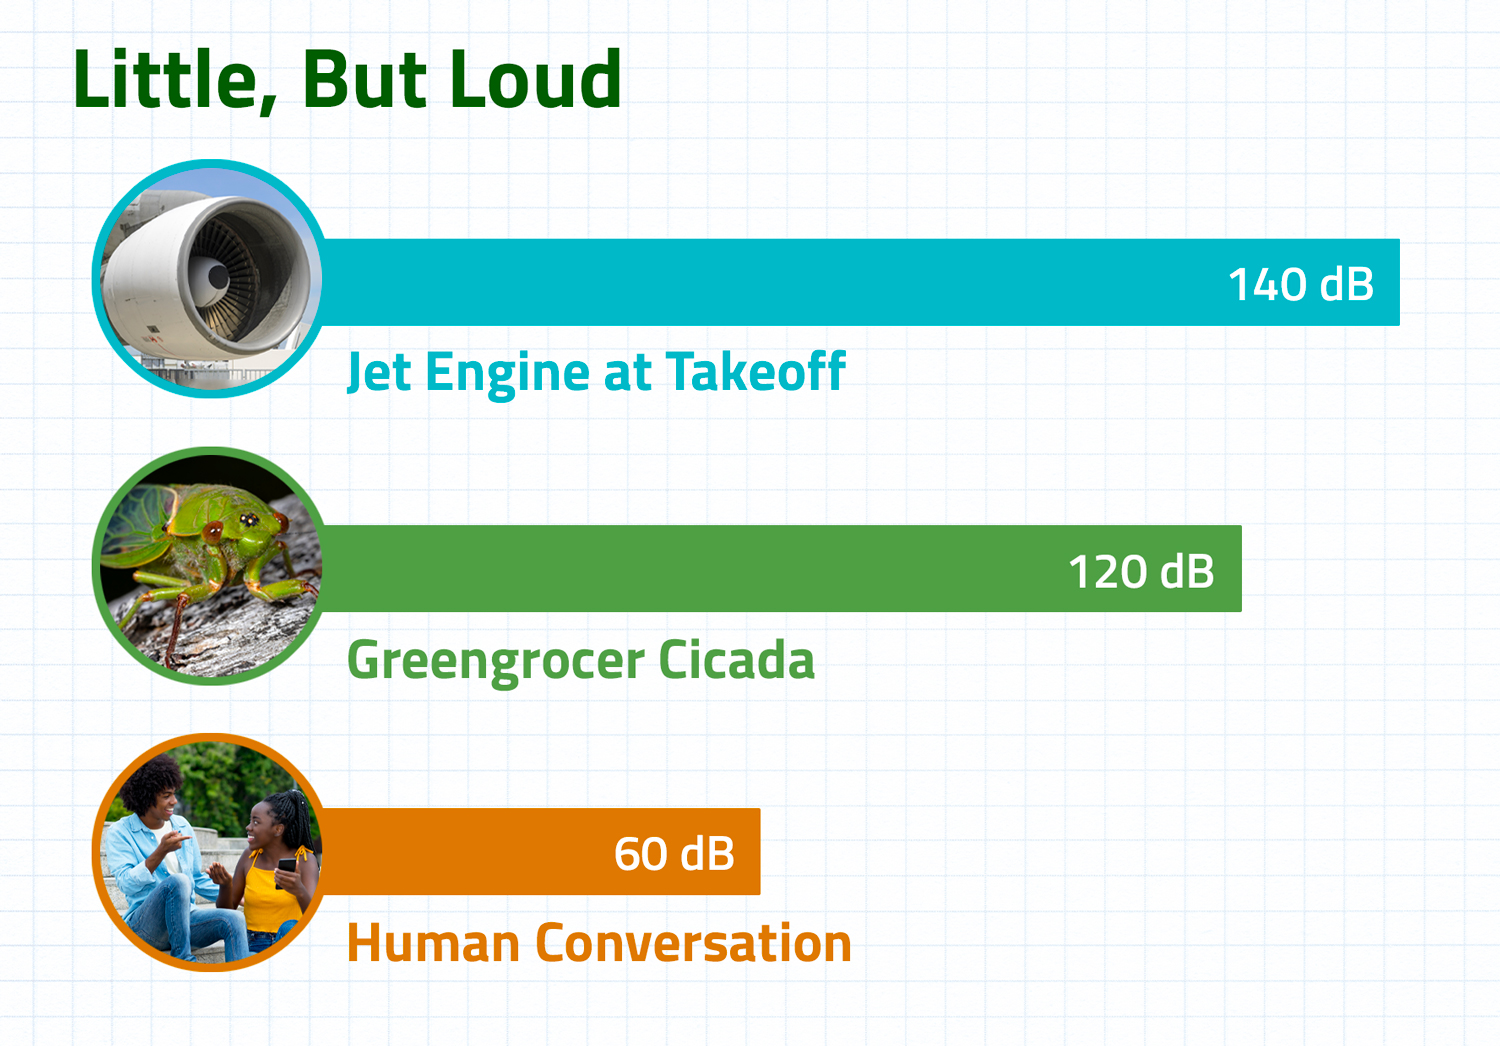 Comparison of the decibel levels of the greengrocer cicada, a jet engine, and human conversation.